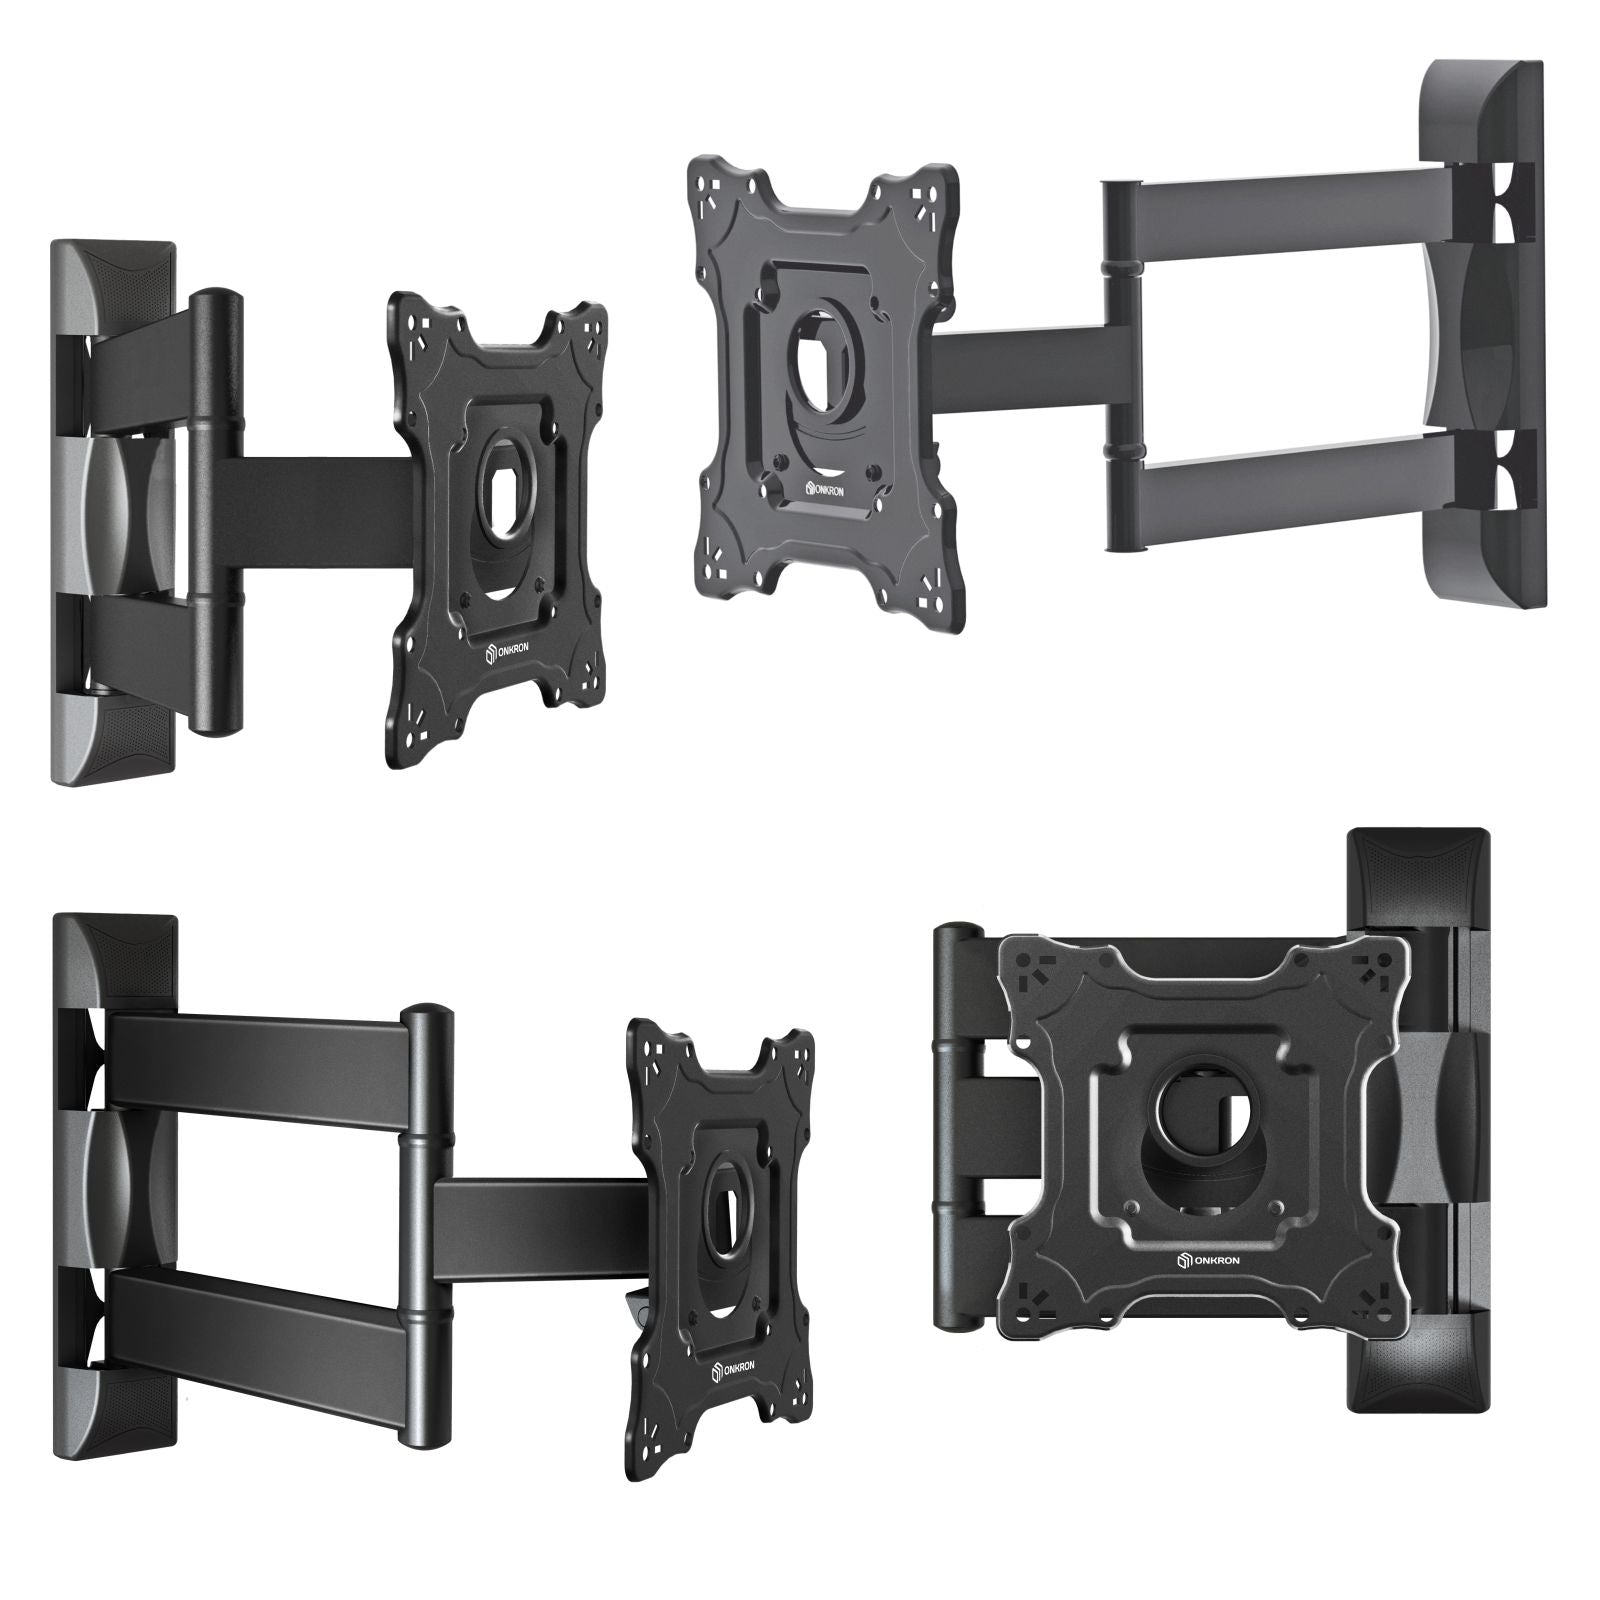 Full Motion TV Wall Mount for 17" to 43-inch Screens up to 77 lb ONKRON M4S, Black